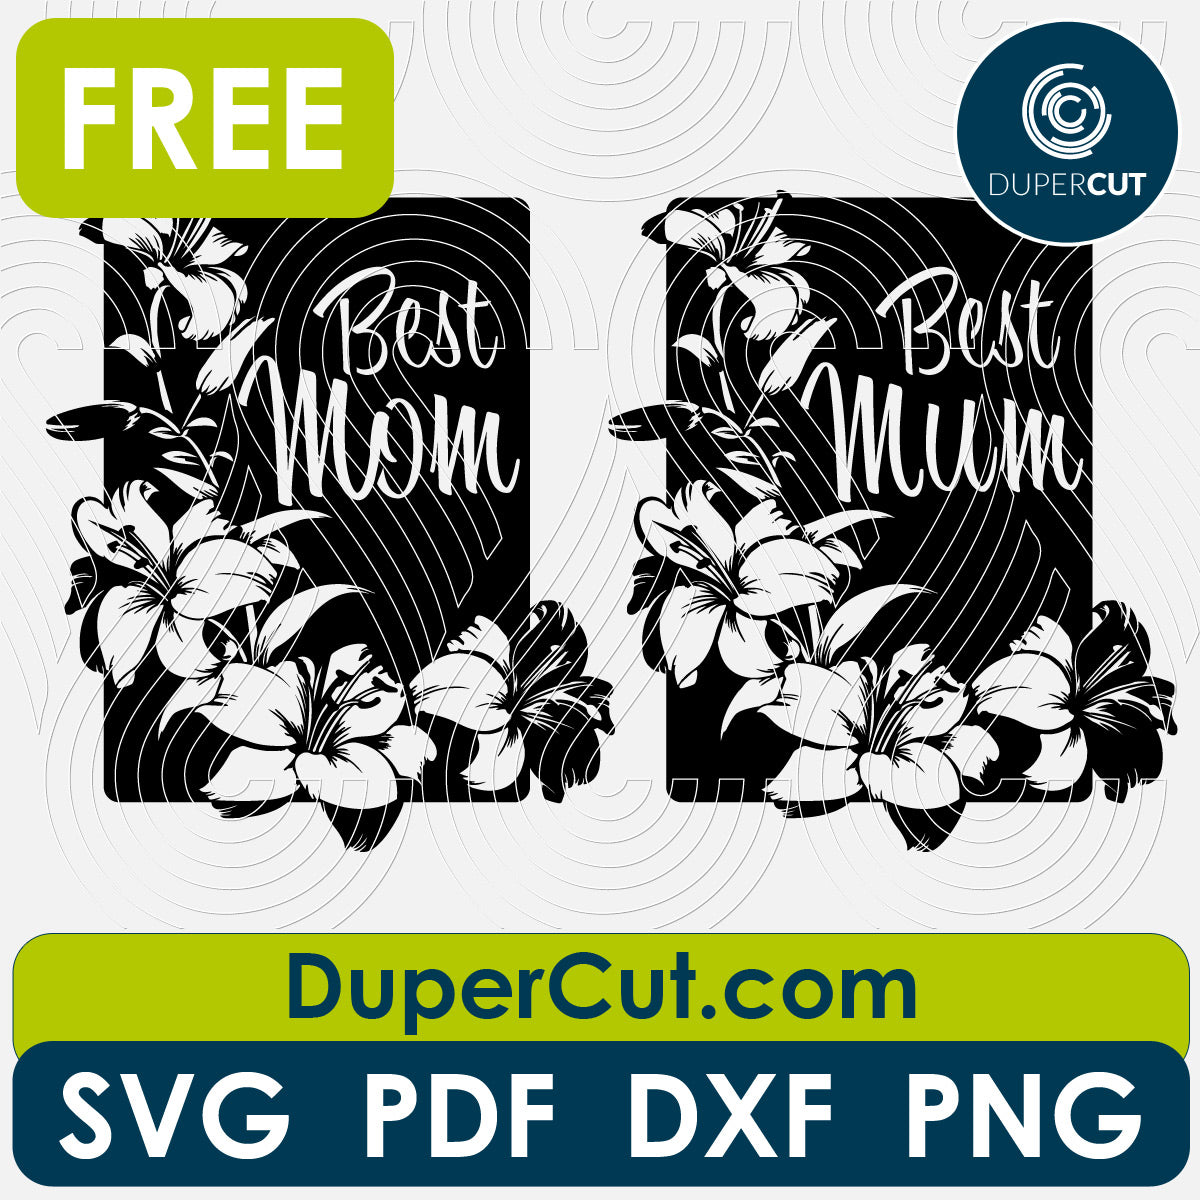 Best mom mum mothers day card - free SVG PNG DXF vector files for laser and blade cutting machines. Glowforge, Cricut, Silhouette cameo templates by www.DuperCut.com